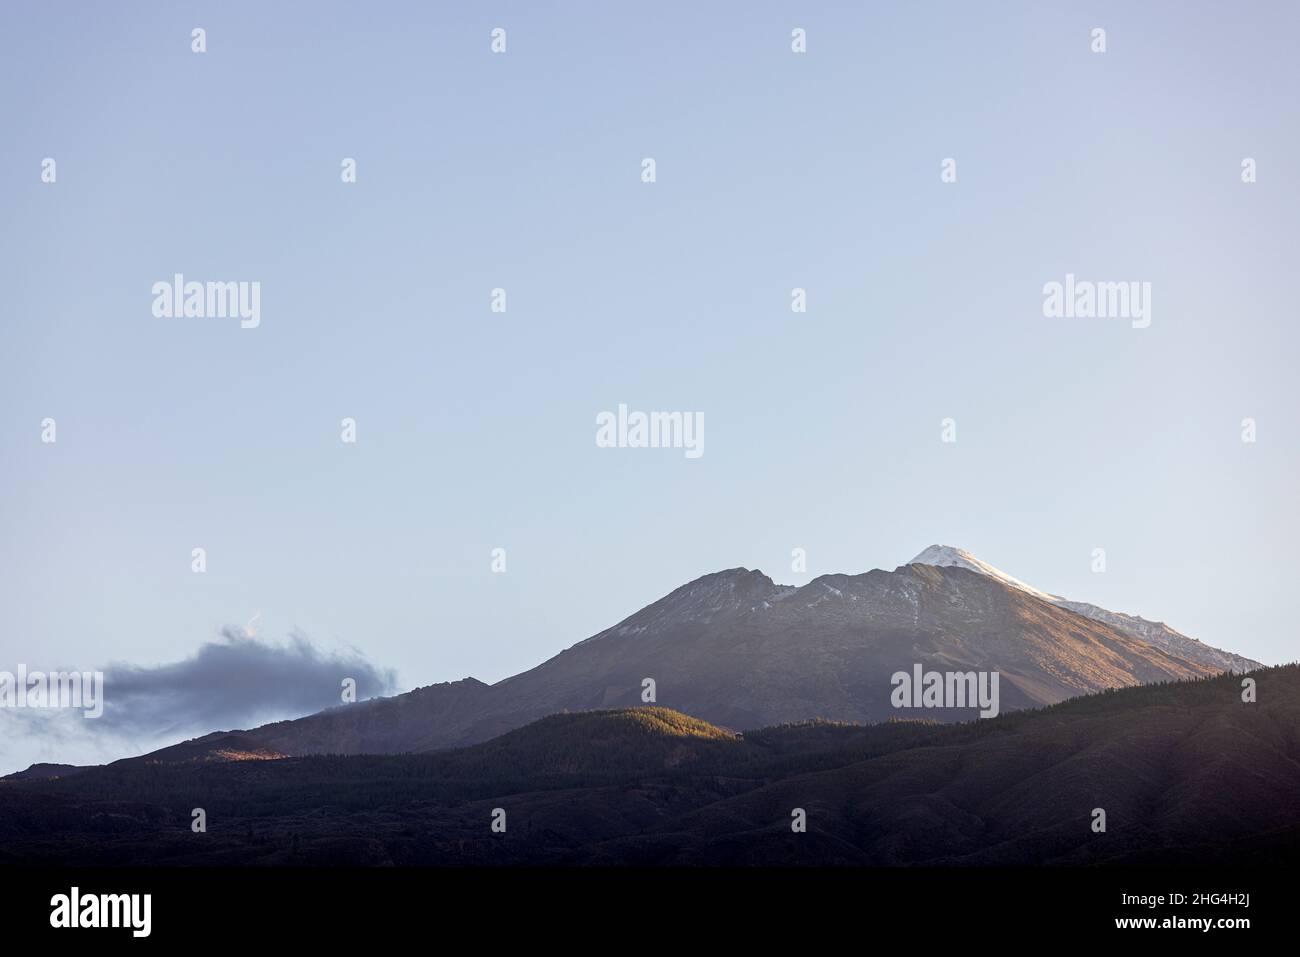 Tenerife, Canary Islands, Spain. 27 November 2021. Mount Teide and the Pico Viejo with the first snow of the season. Stock Photo